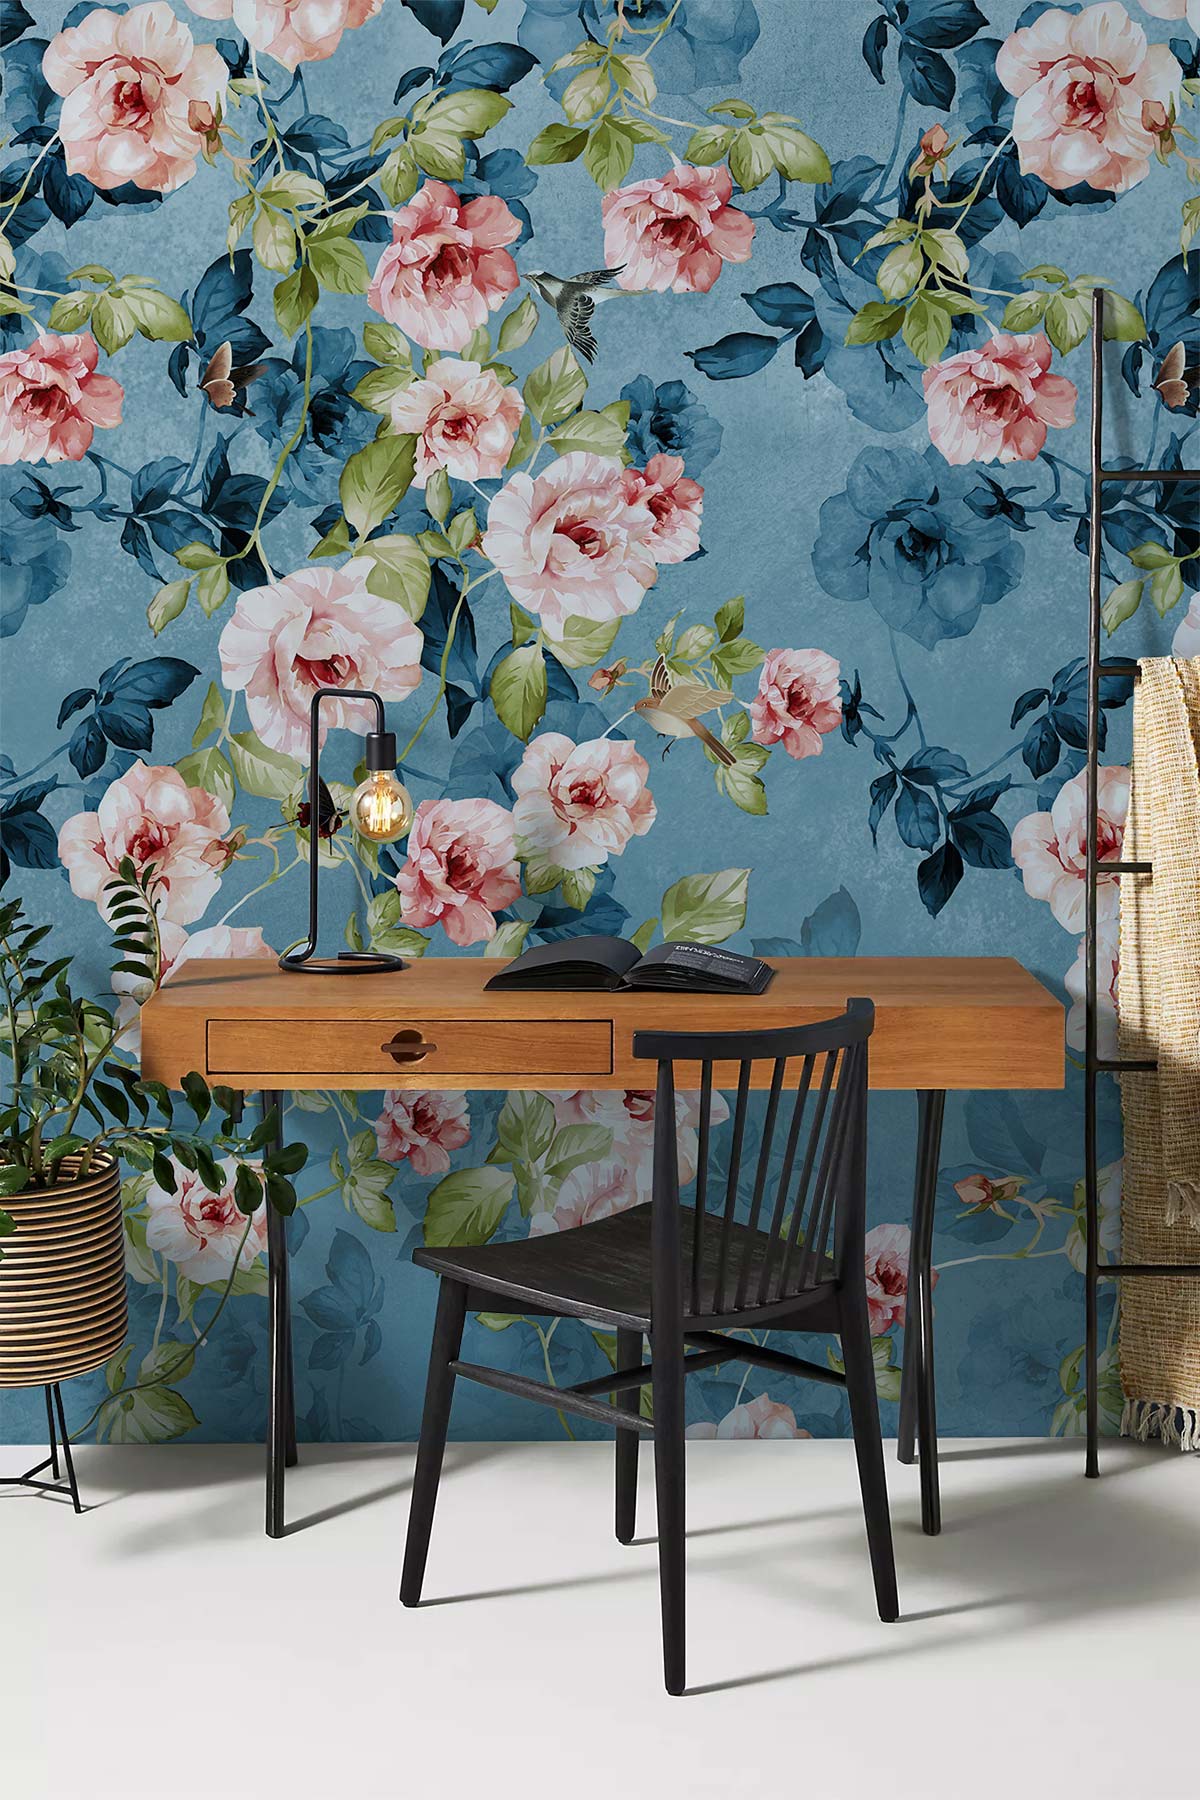 Moonflowers Wallpaper Mural for the Beauty of Home or Office Decoration